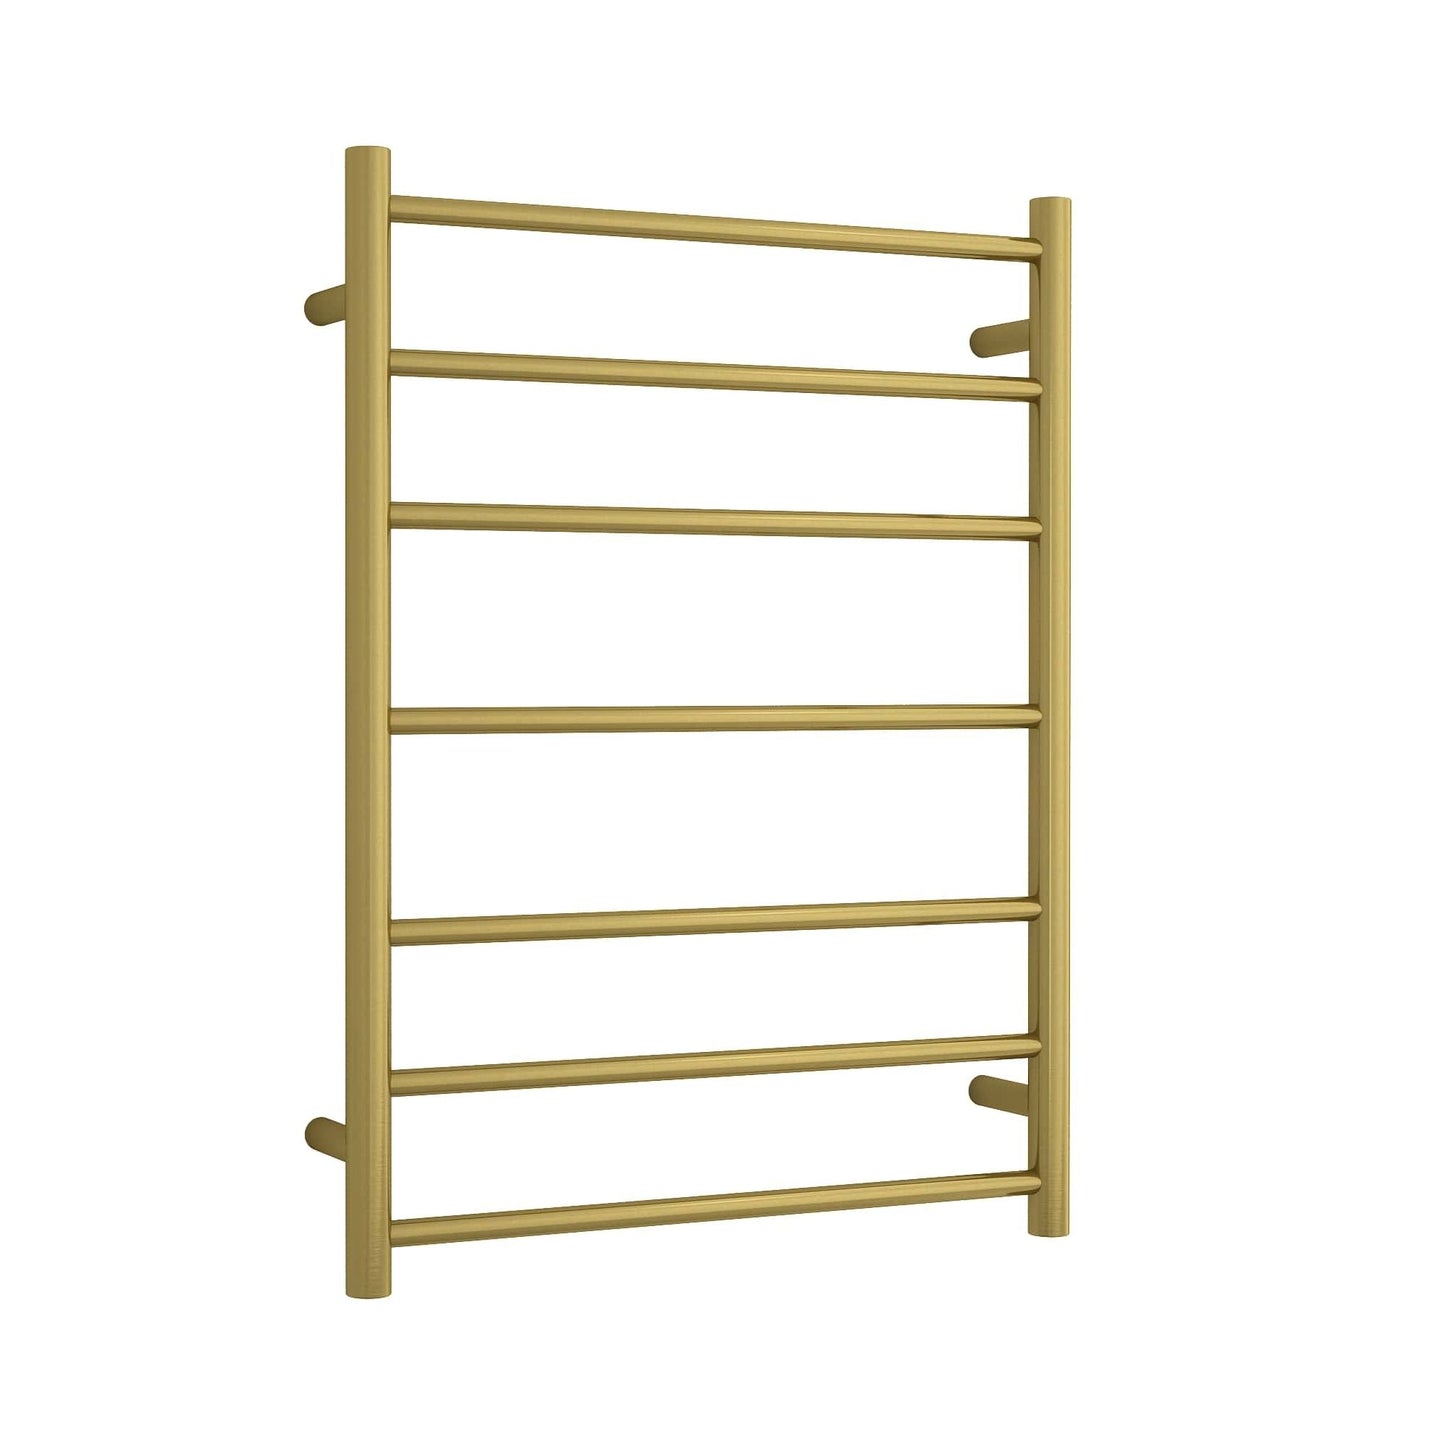 THERMORAIL - SR44MBG Brushed Gold Round Ladder Heated Towel Rail